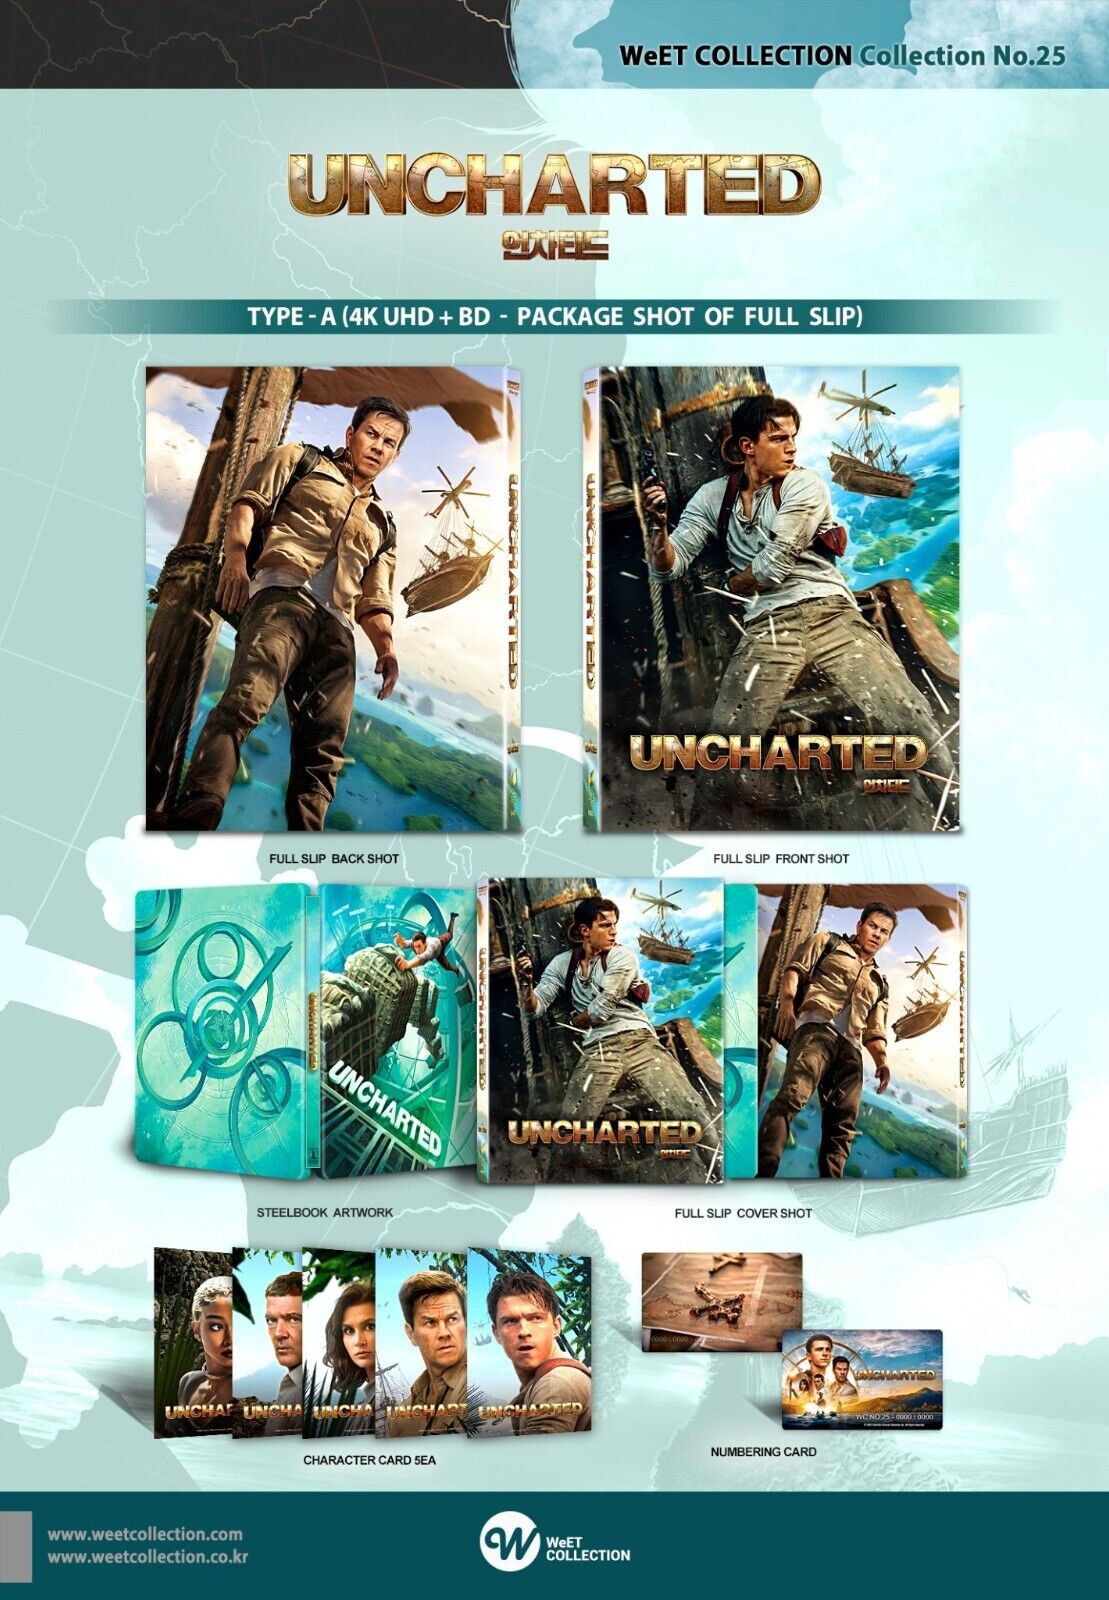 Uncharted 4K Blu-Ray Steelbook WeET Collection Collection #25 Full Slip